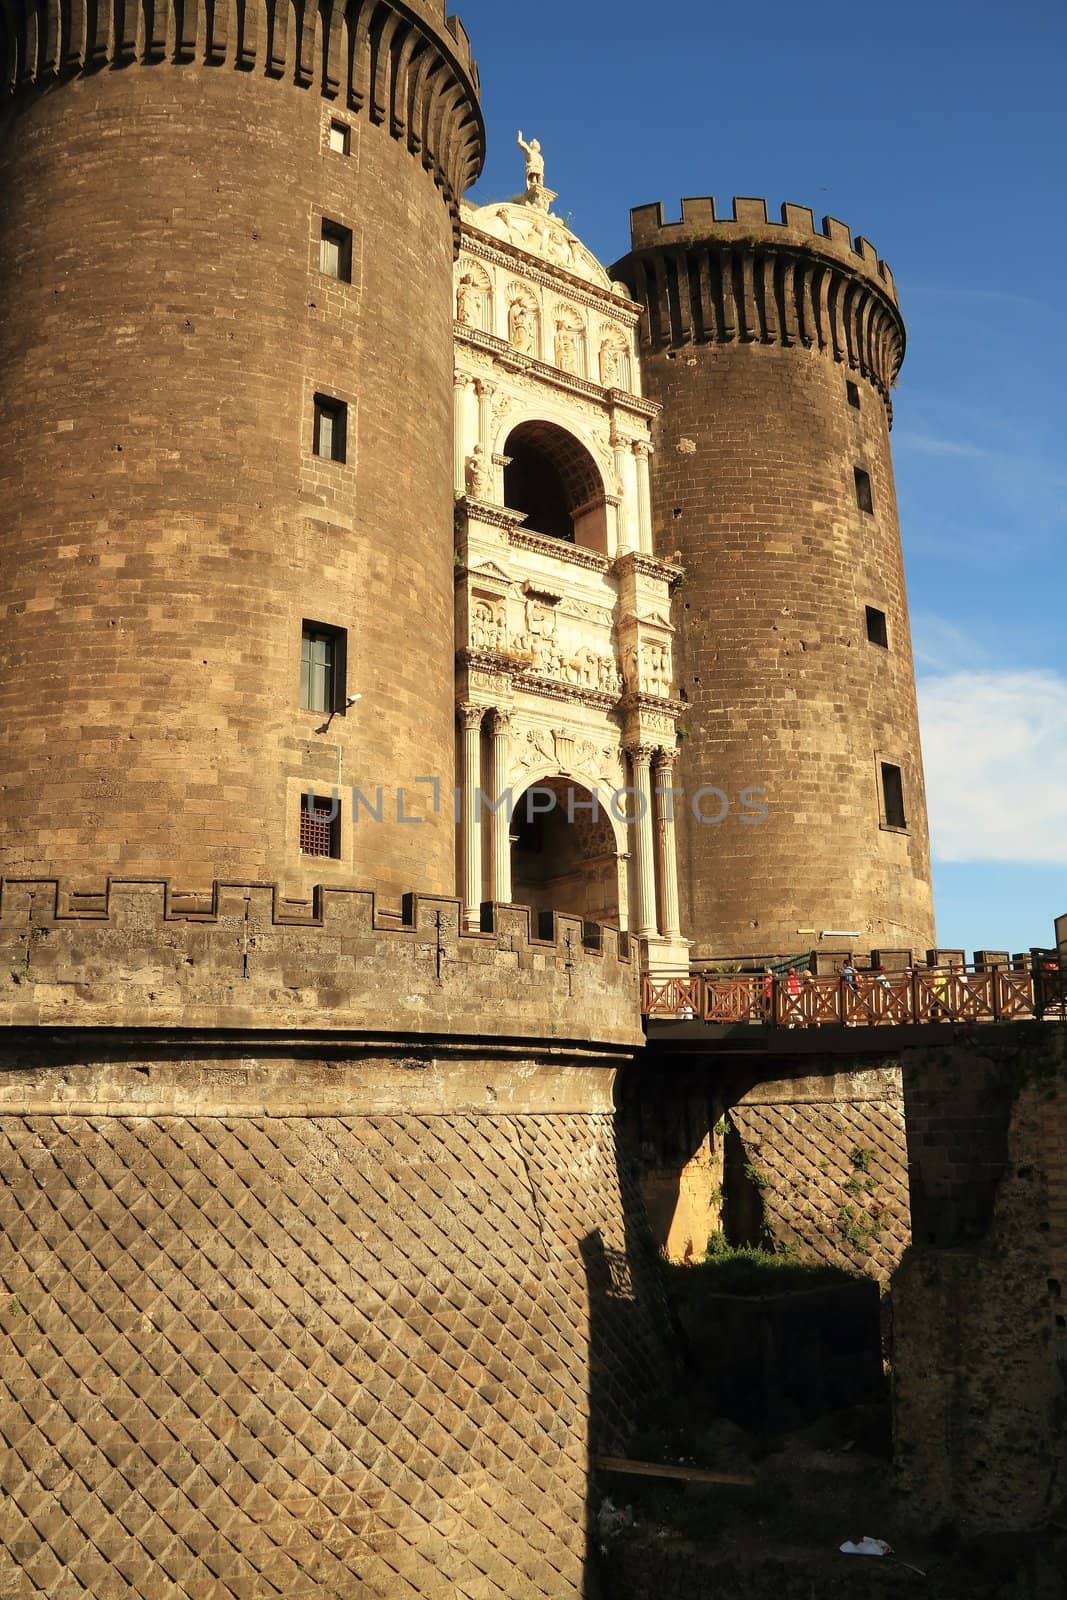 The towers and defenses of Castle Nuovo in Naples, Italy.